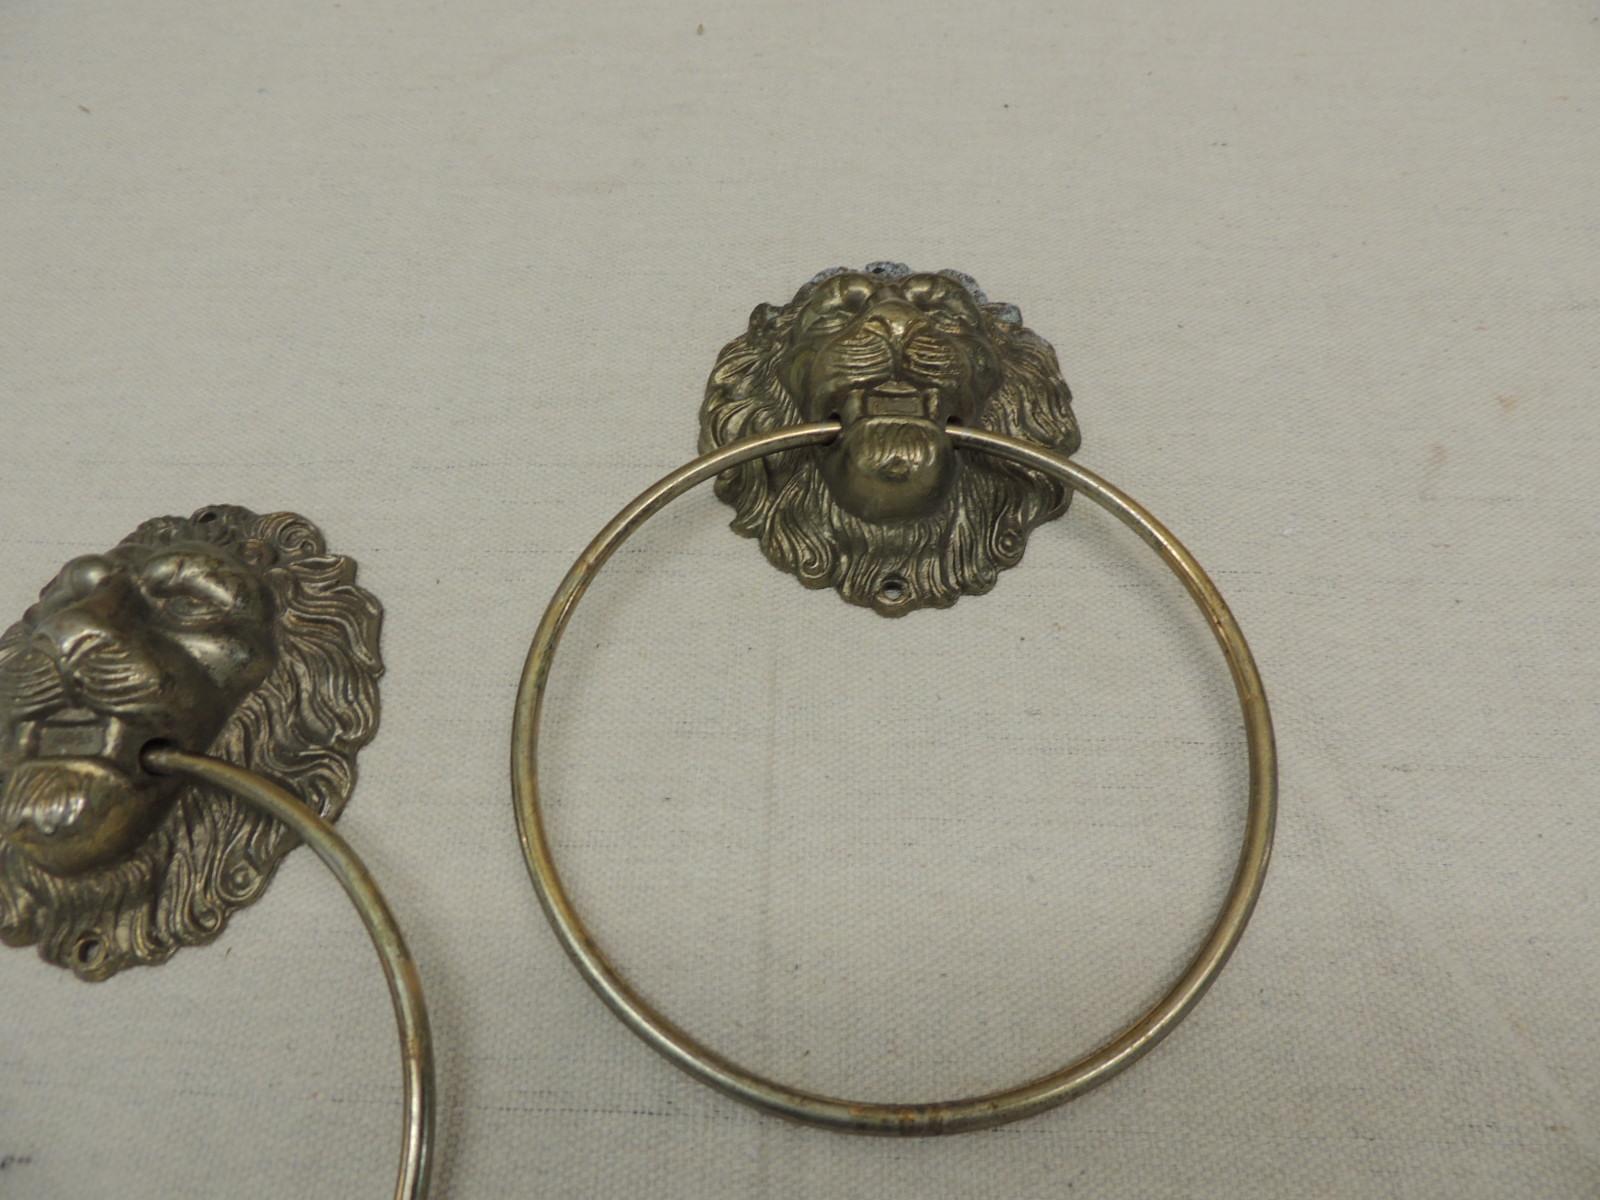 Pair of vintage curtain brass tie backs with lions heads
or guest towels holders.
Size: 8